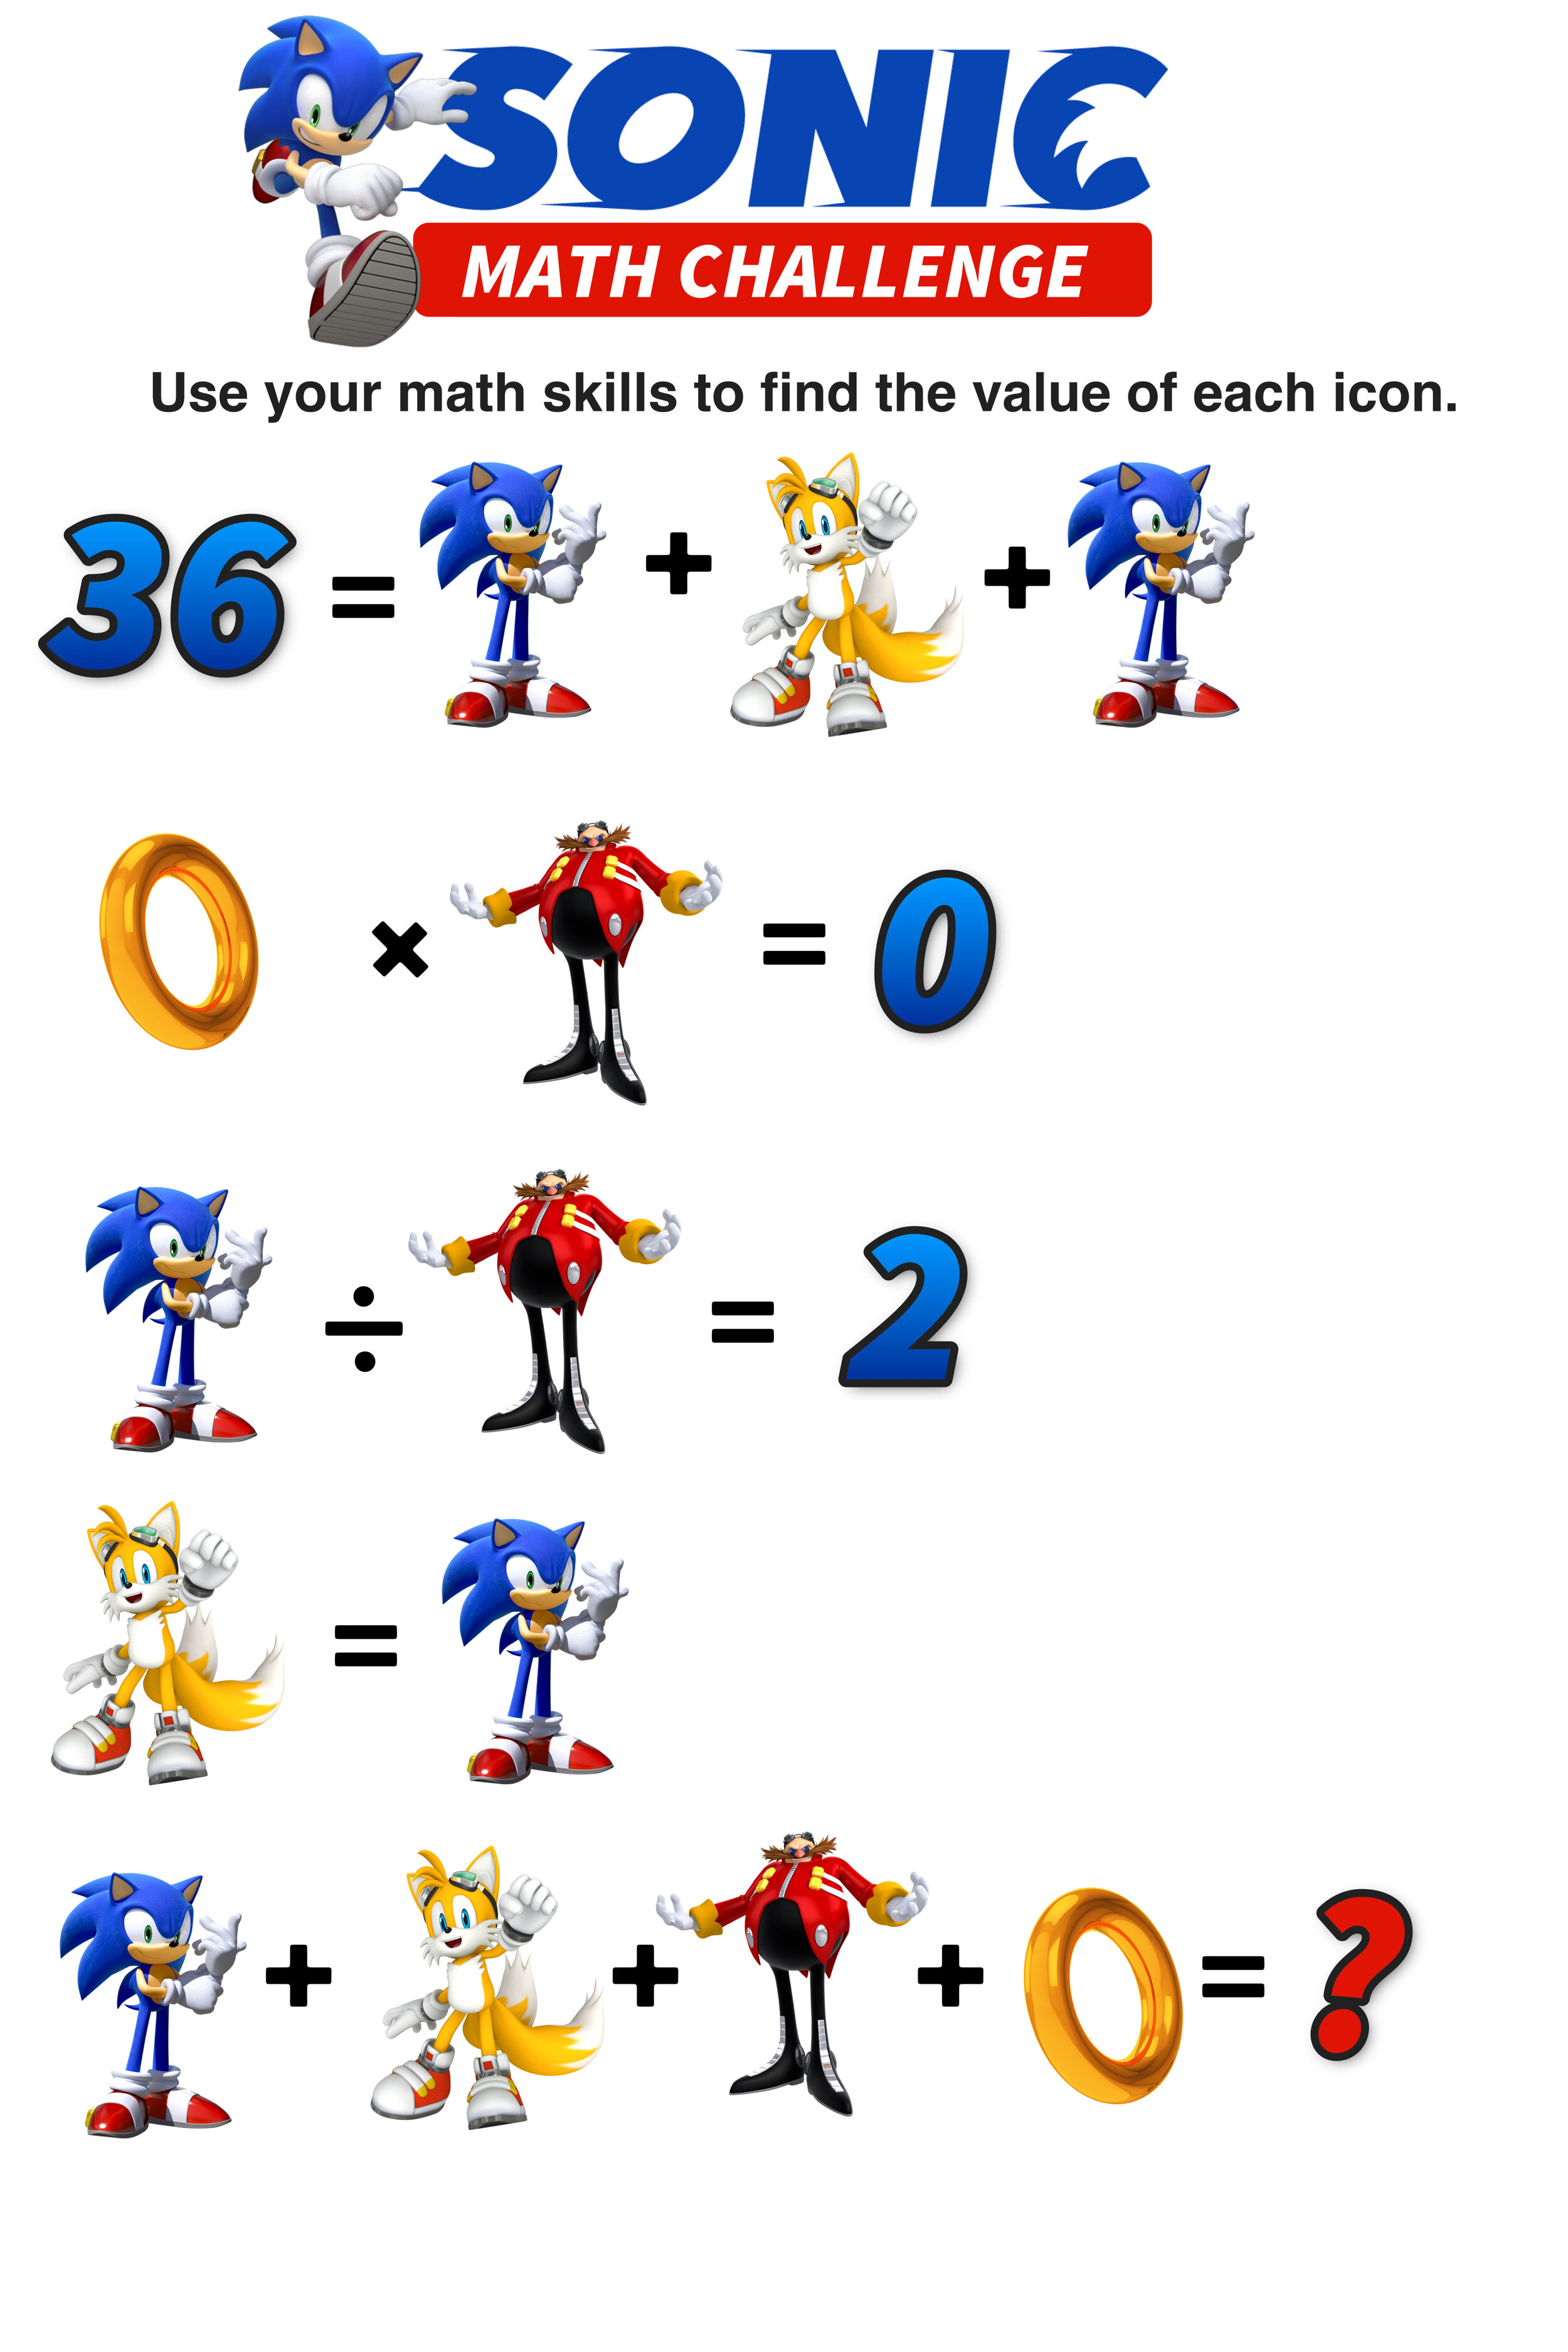 Are You Ready for These Sonic the Hedgehog Math Puzzles? — Mashup Math